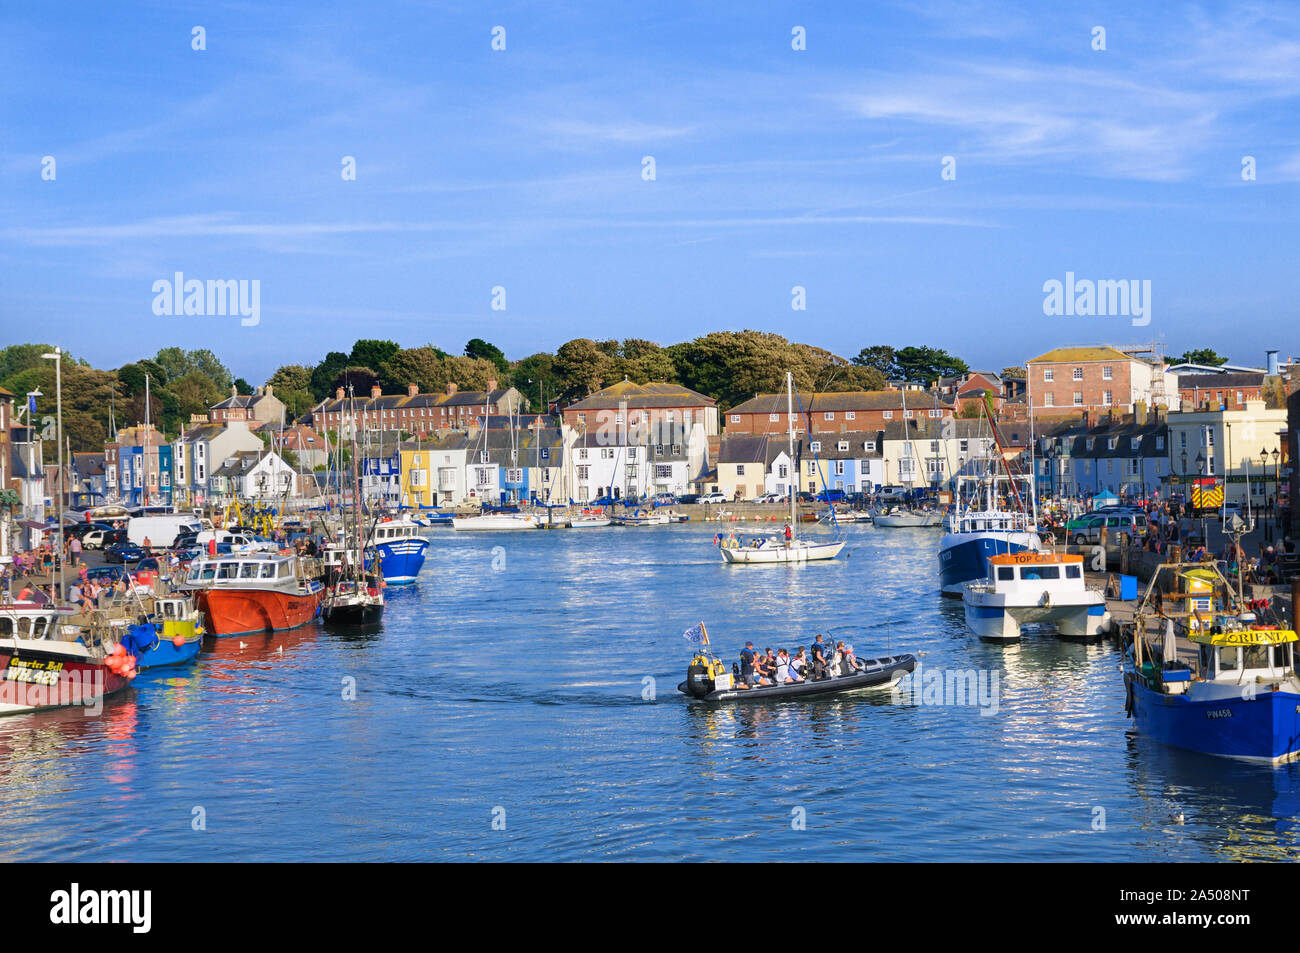 A view of the boats and cottages surrounding the Old Harbour in Weymouth on a summer's afternoon, Jurassic Coast, Dorset, England, UK Stock Photo